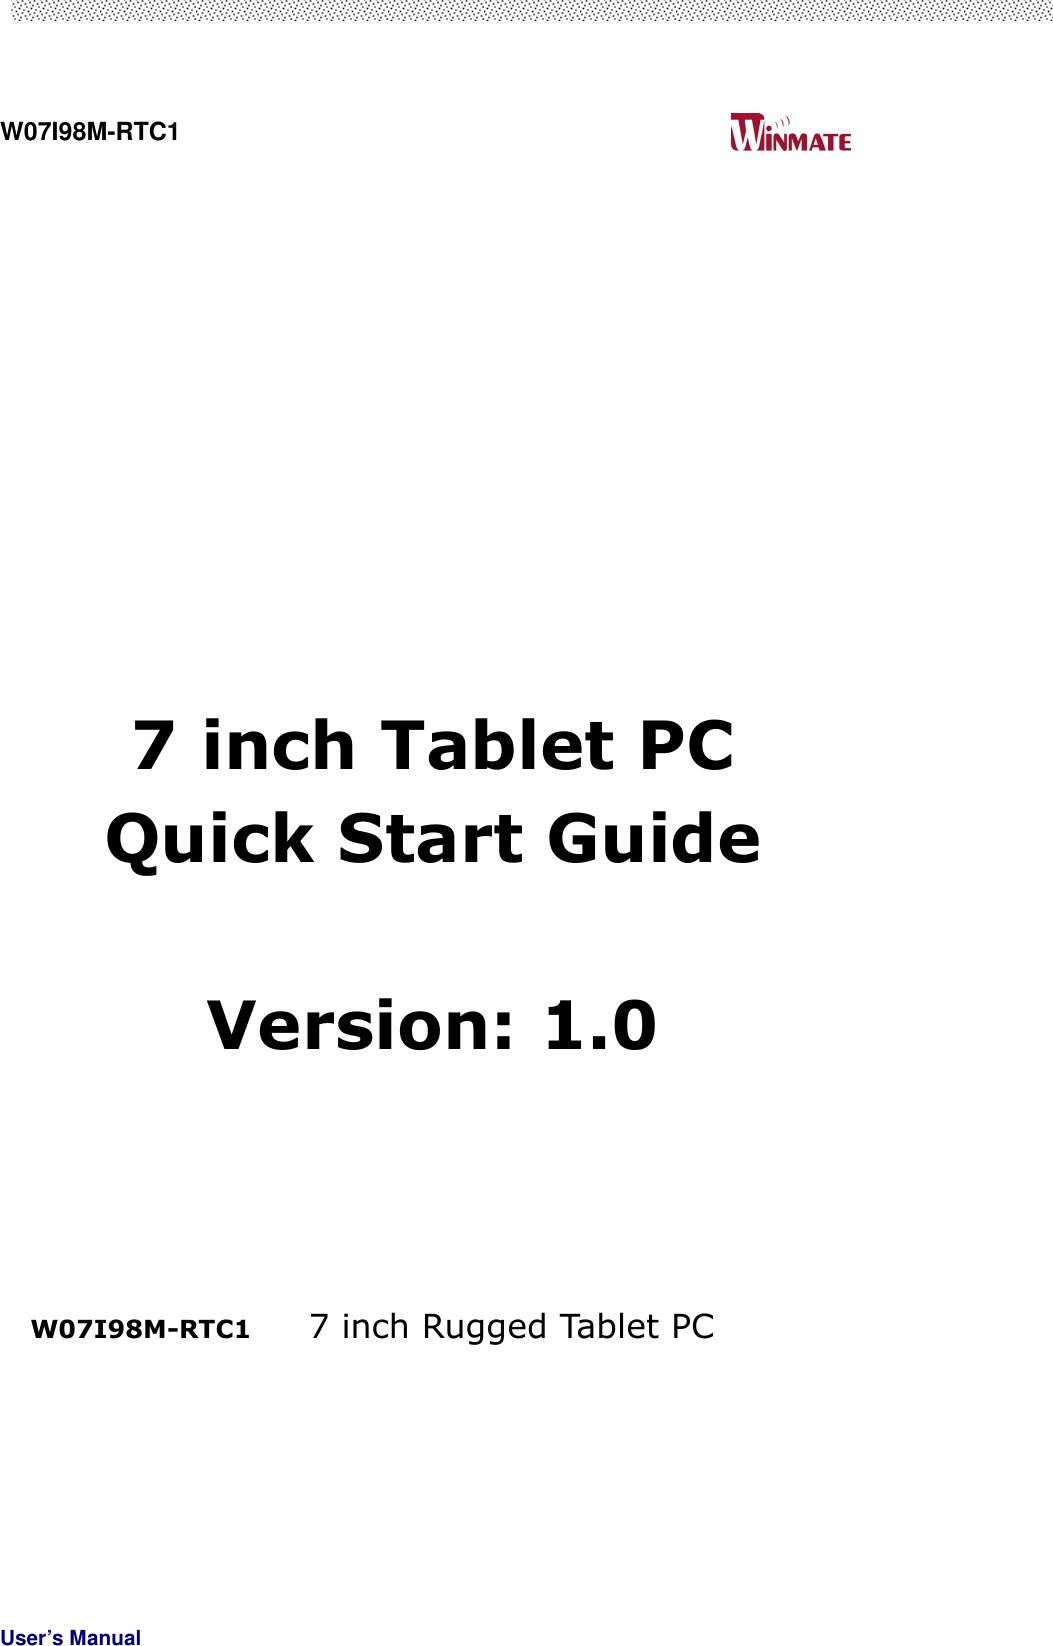  W07I98M-RTC1                                                                                   User’s Manual                                                               7 inch Tablet PC   Quick Start Guide  Version: 1.0         W07I98M-RTC1  7 inch Rugged Tablet PC     